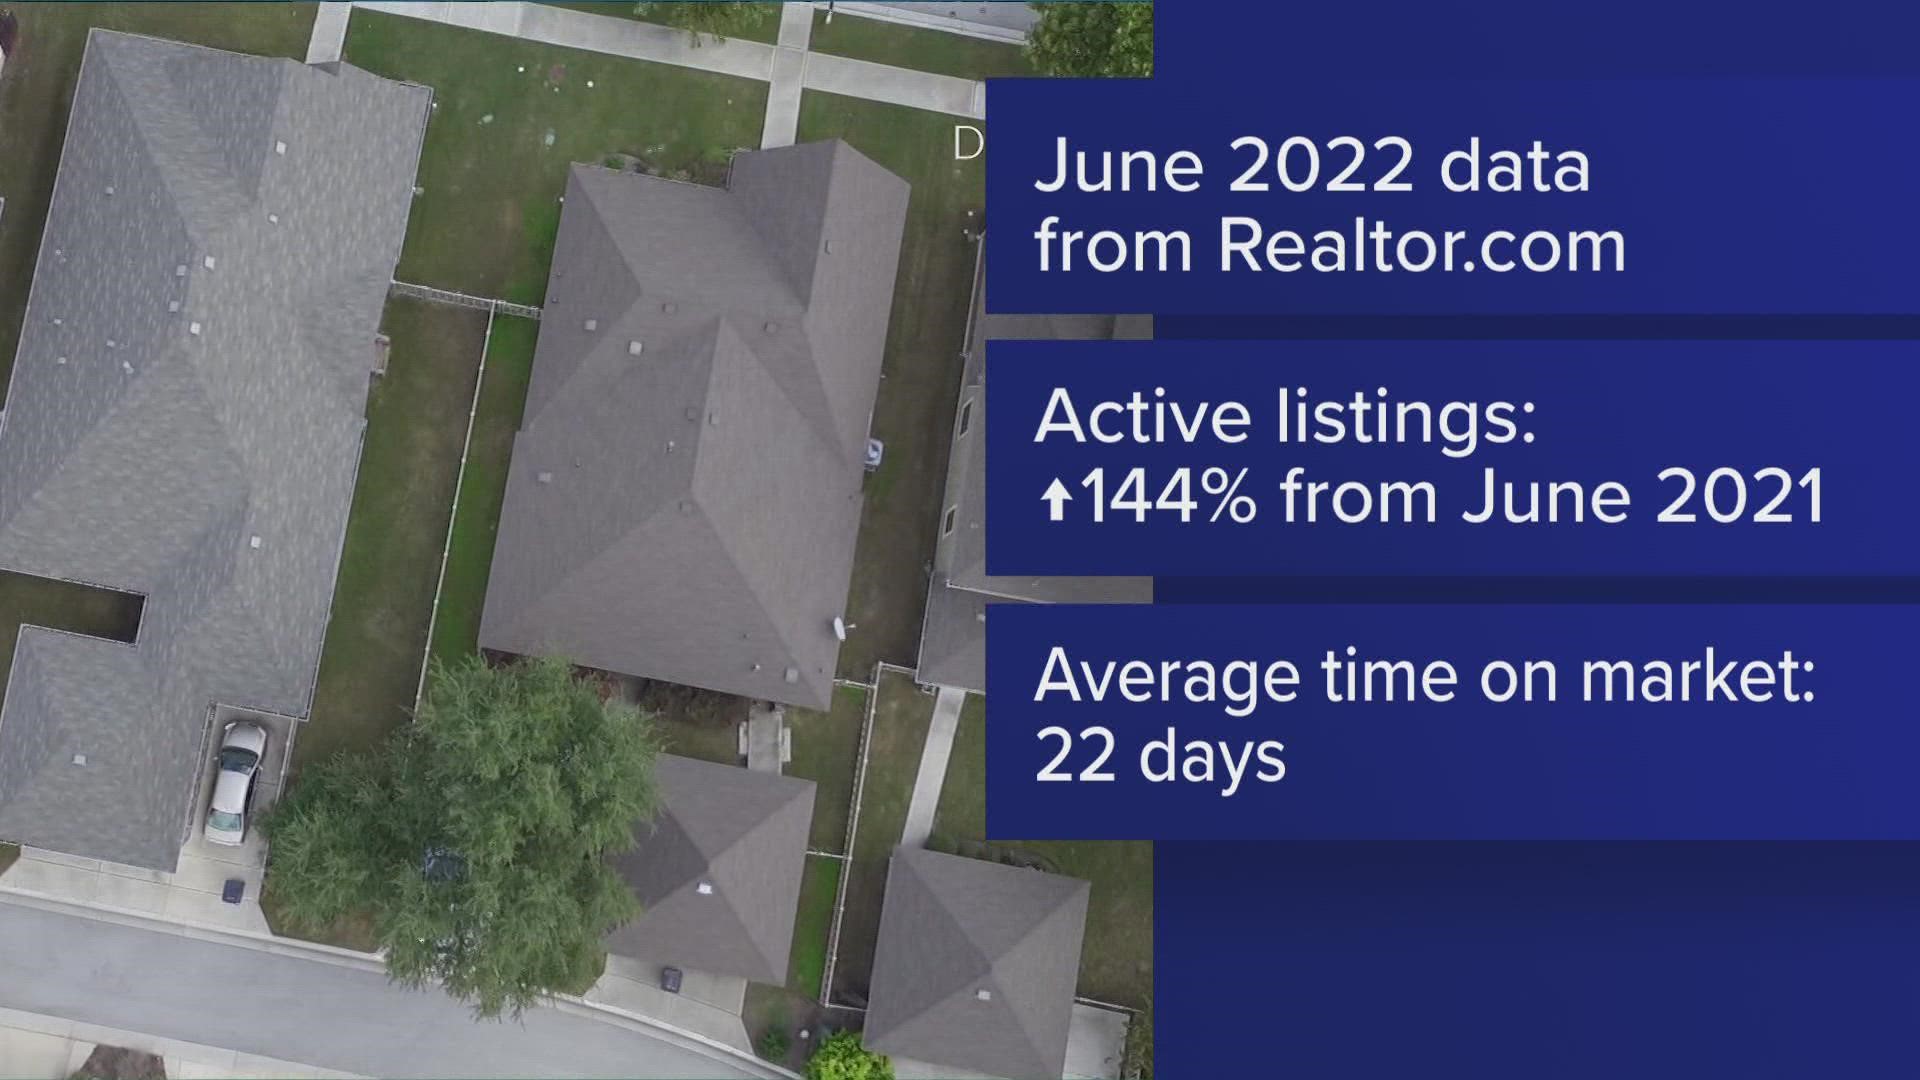 Active listings last month more than doubled compared to June 2021, jumping by 144%.